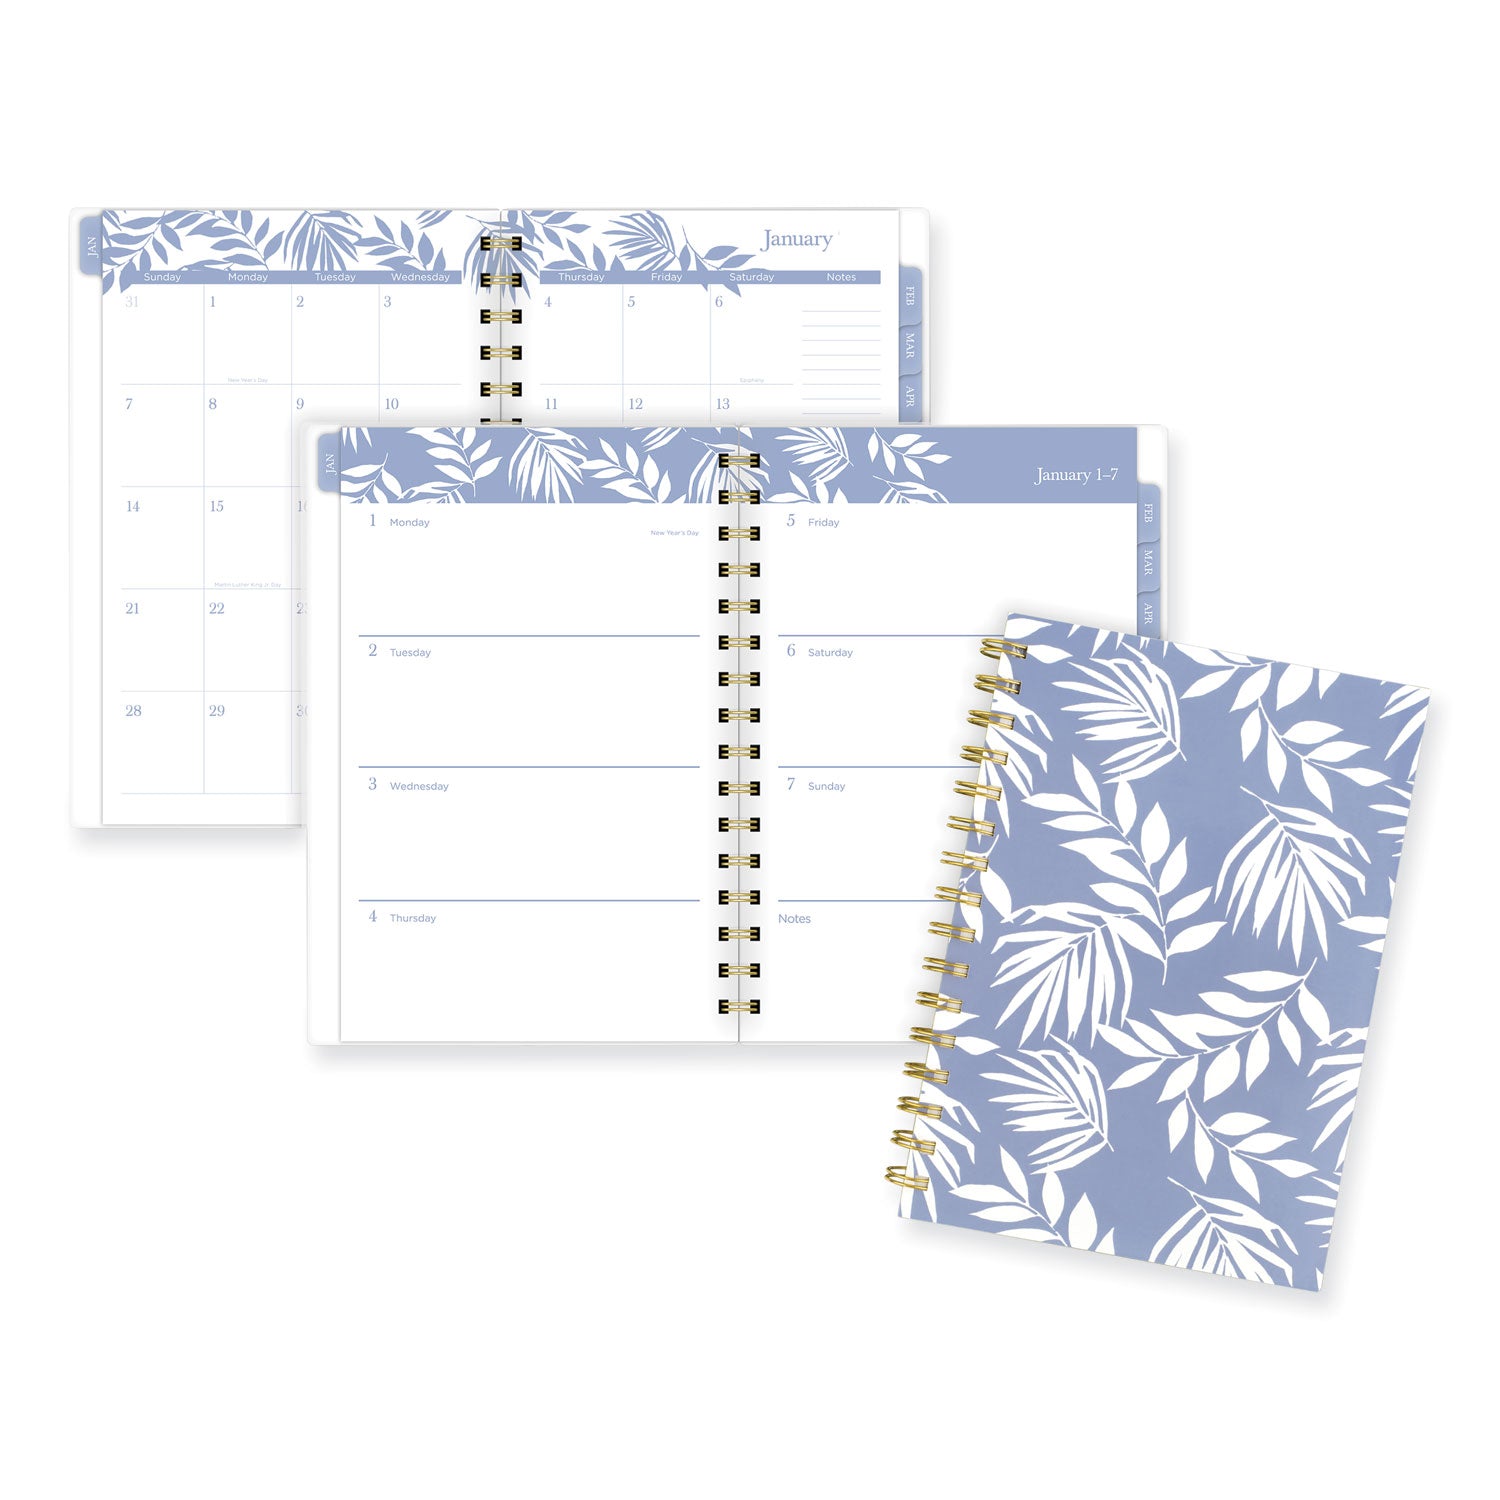 elena-weekly-monthly-planner-palm-leaves-artwork-85-x-638-blue-white-cover-12-month-jan-to-dec-2024_aag1680200 - 1